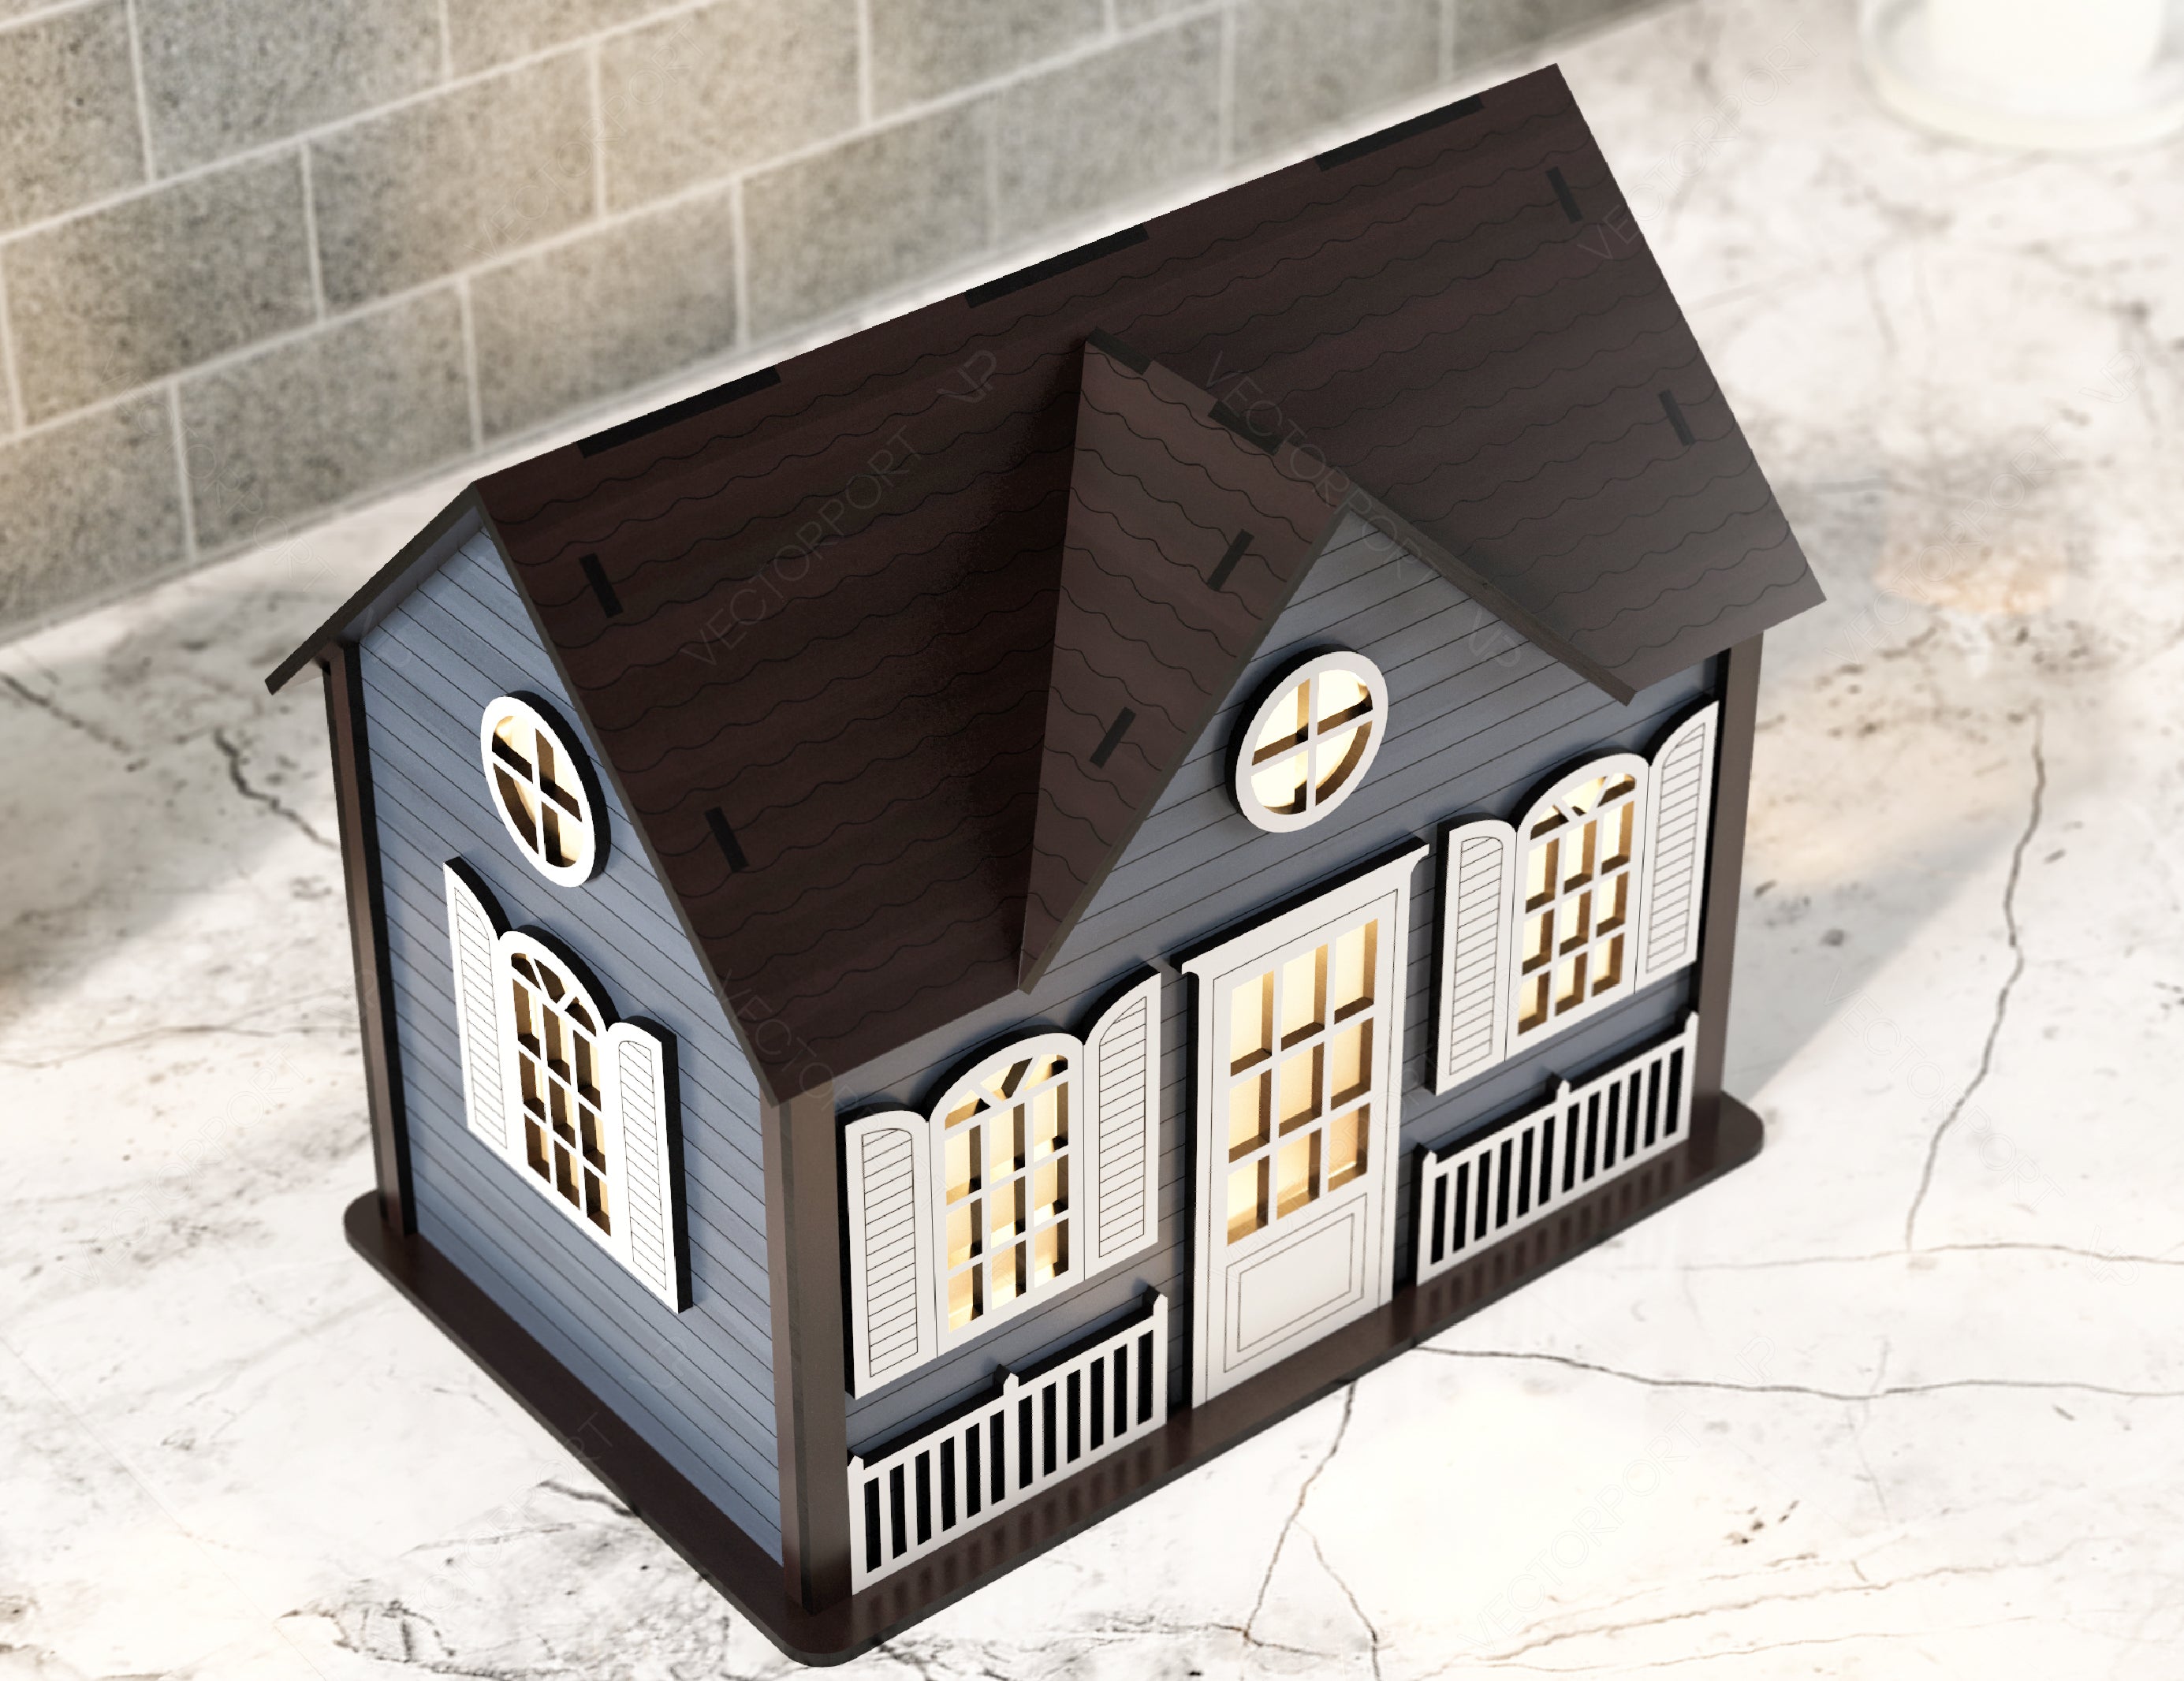 Wooden House Laser Cut Night Light Lamp Mdf Laser Cutting Home Lampshade Table Candle Holder Tea light SVG |#U179|